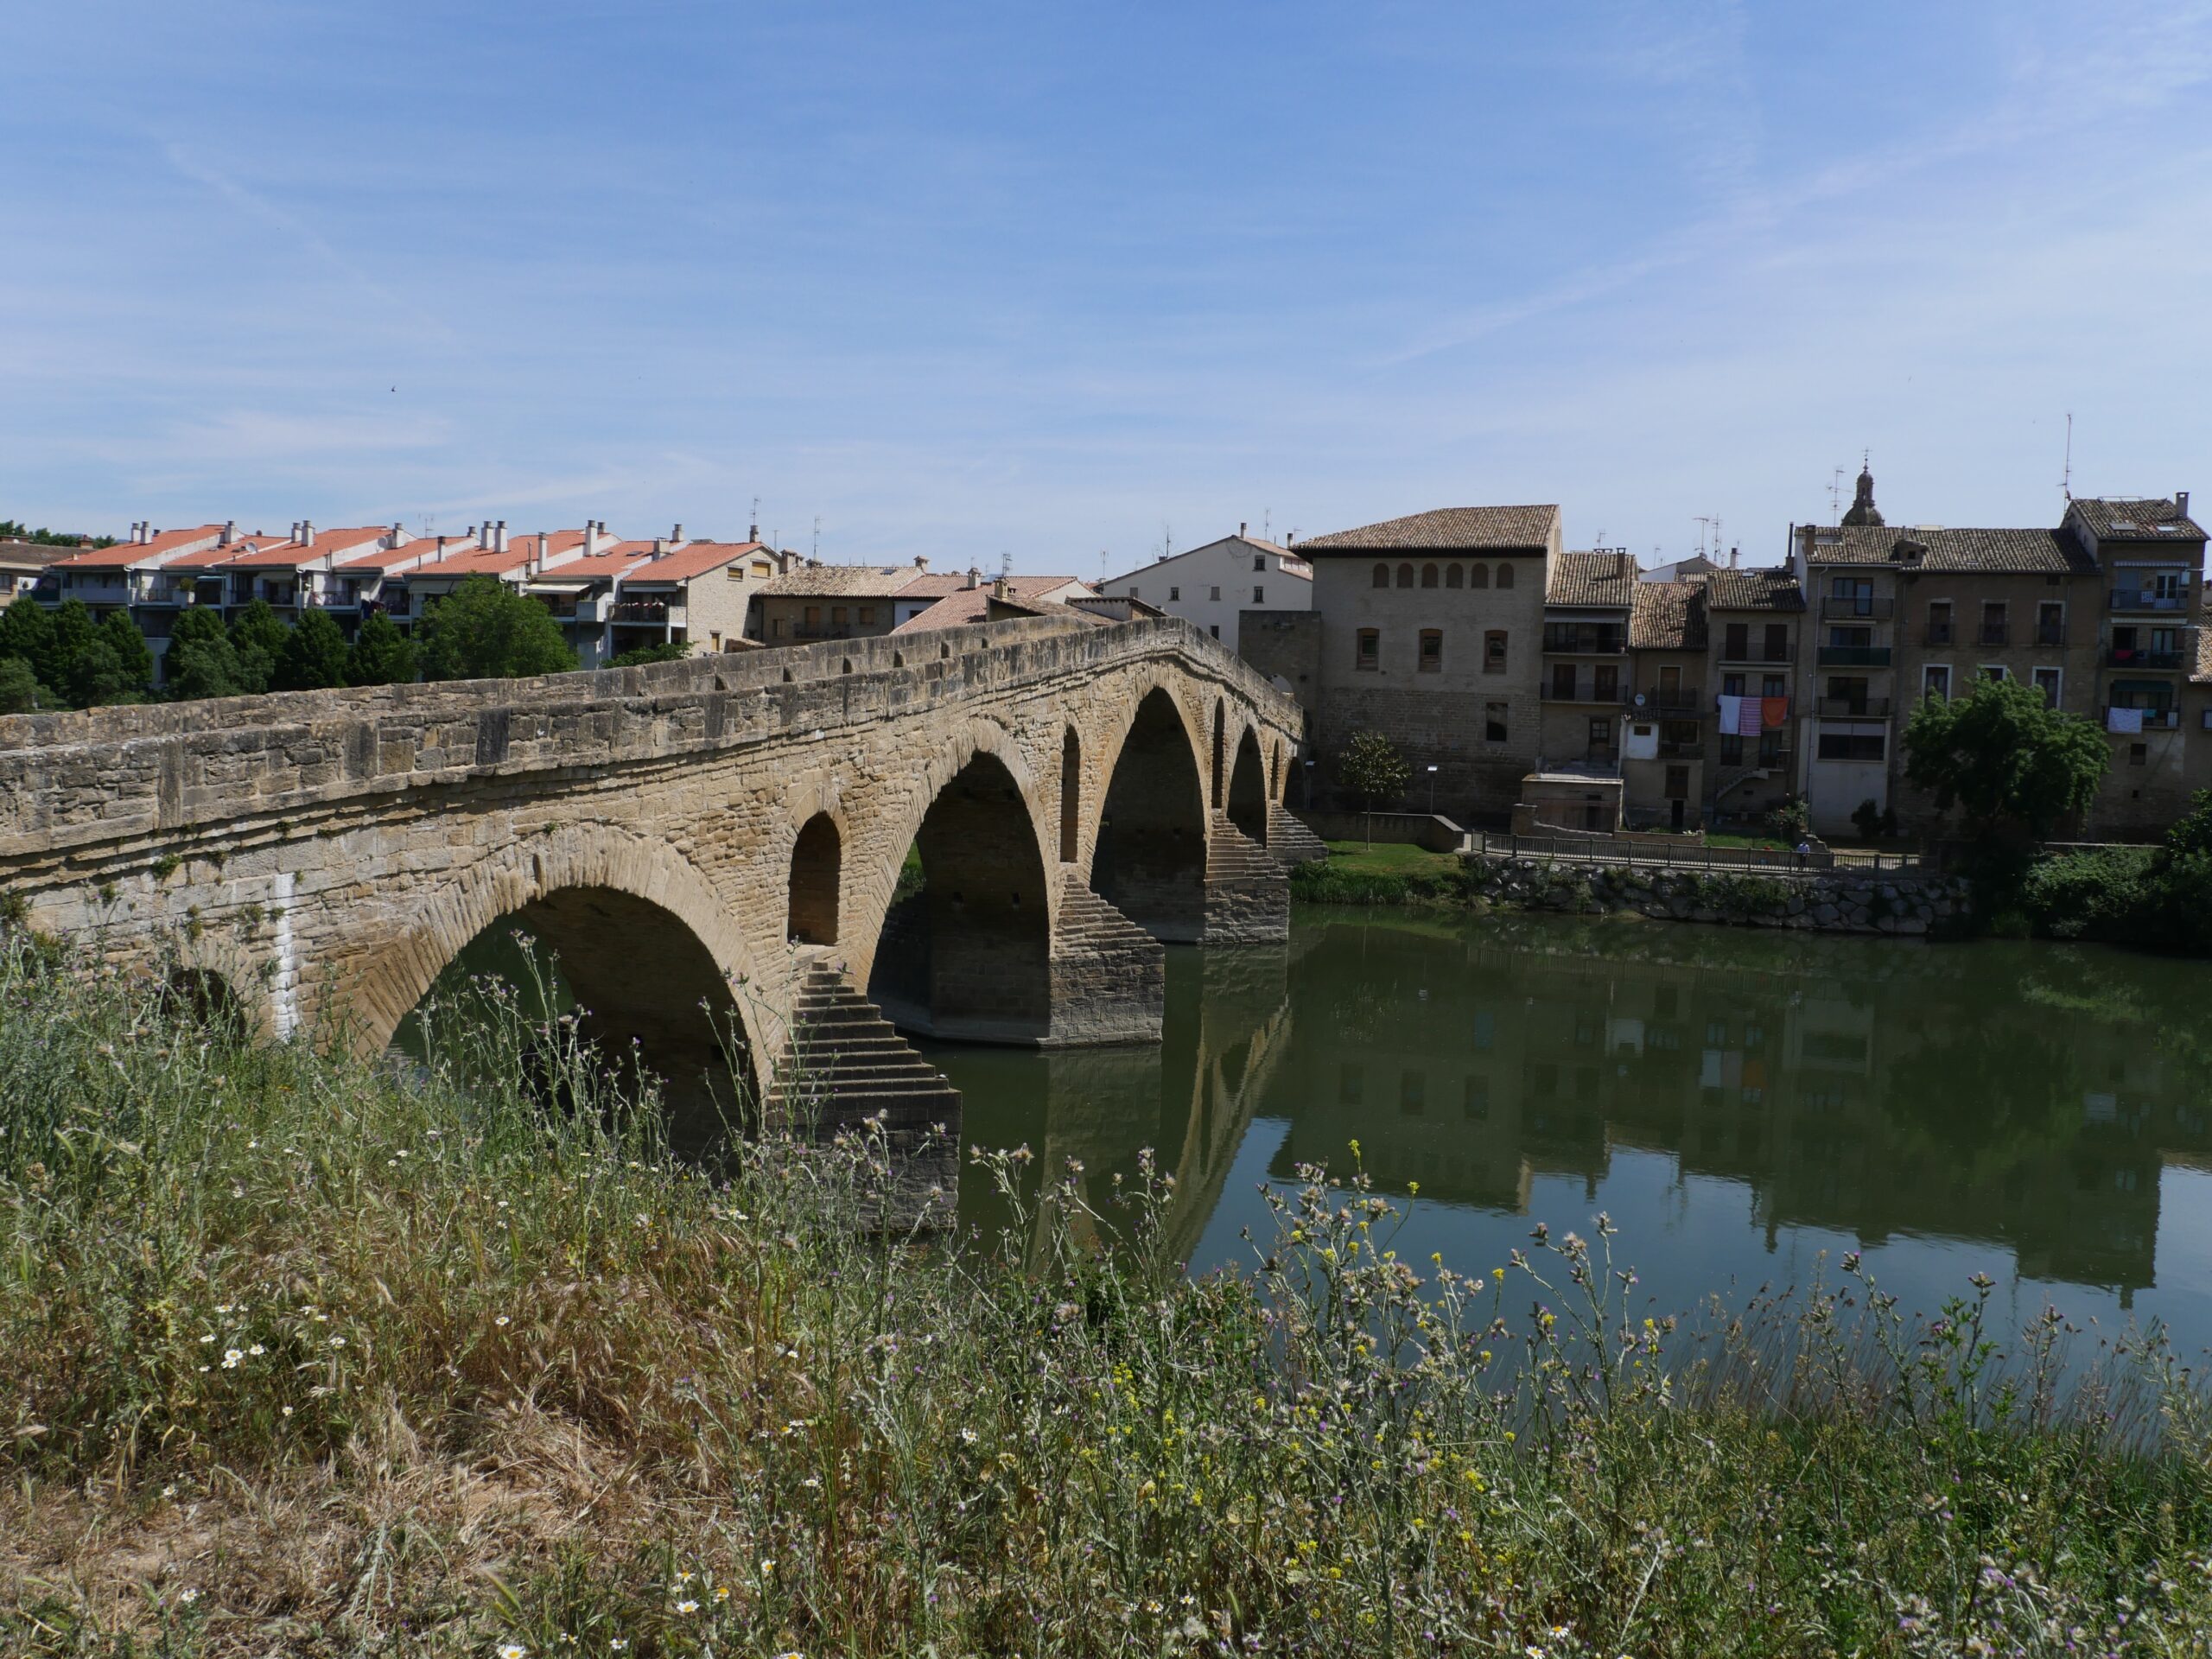 A famous, six-arched bridge allows hikers to cross the river in Puente La Reina, Spain.